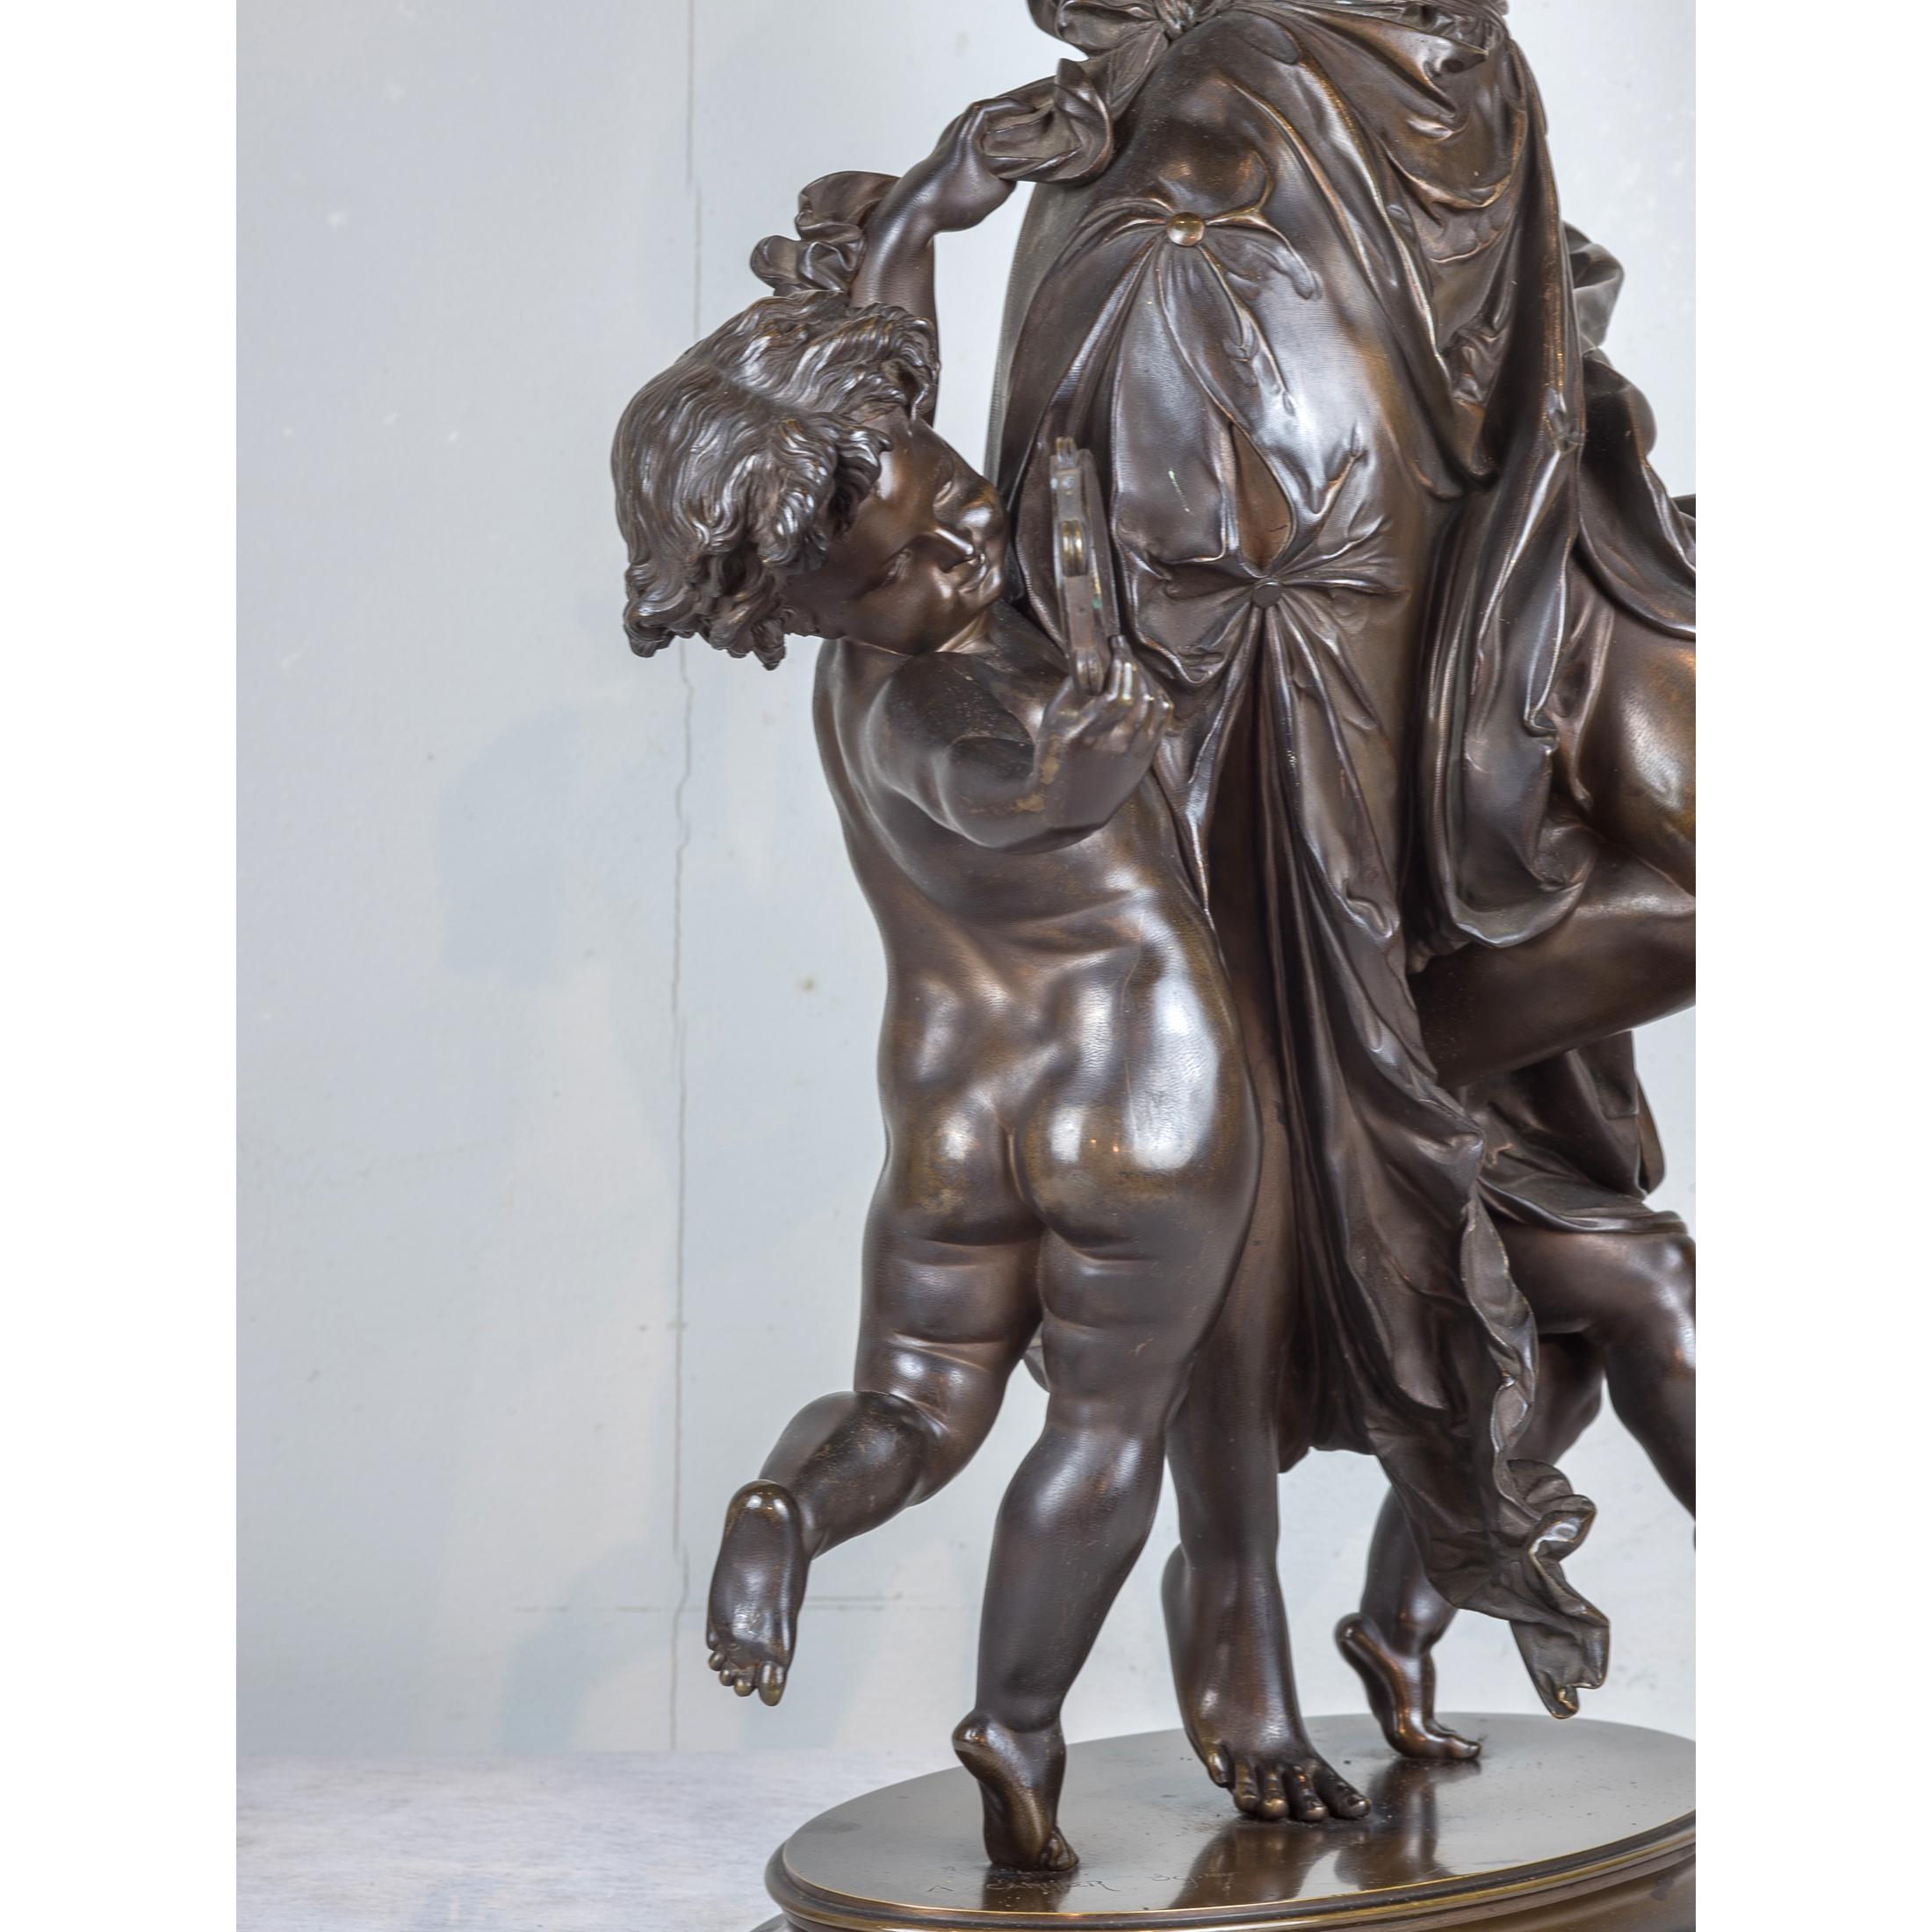 A Fine Quality Patinated Bronze Group of Maenad and Cherubs Dancing - Gold Figurative Sculpture by Auguste Joseph Carrier